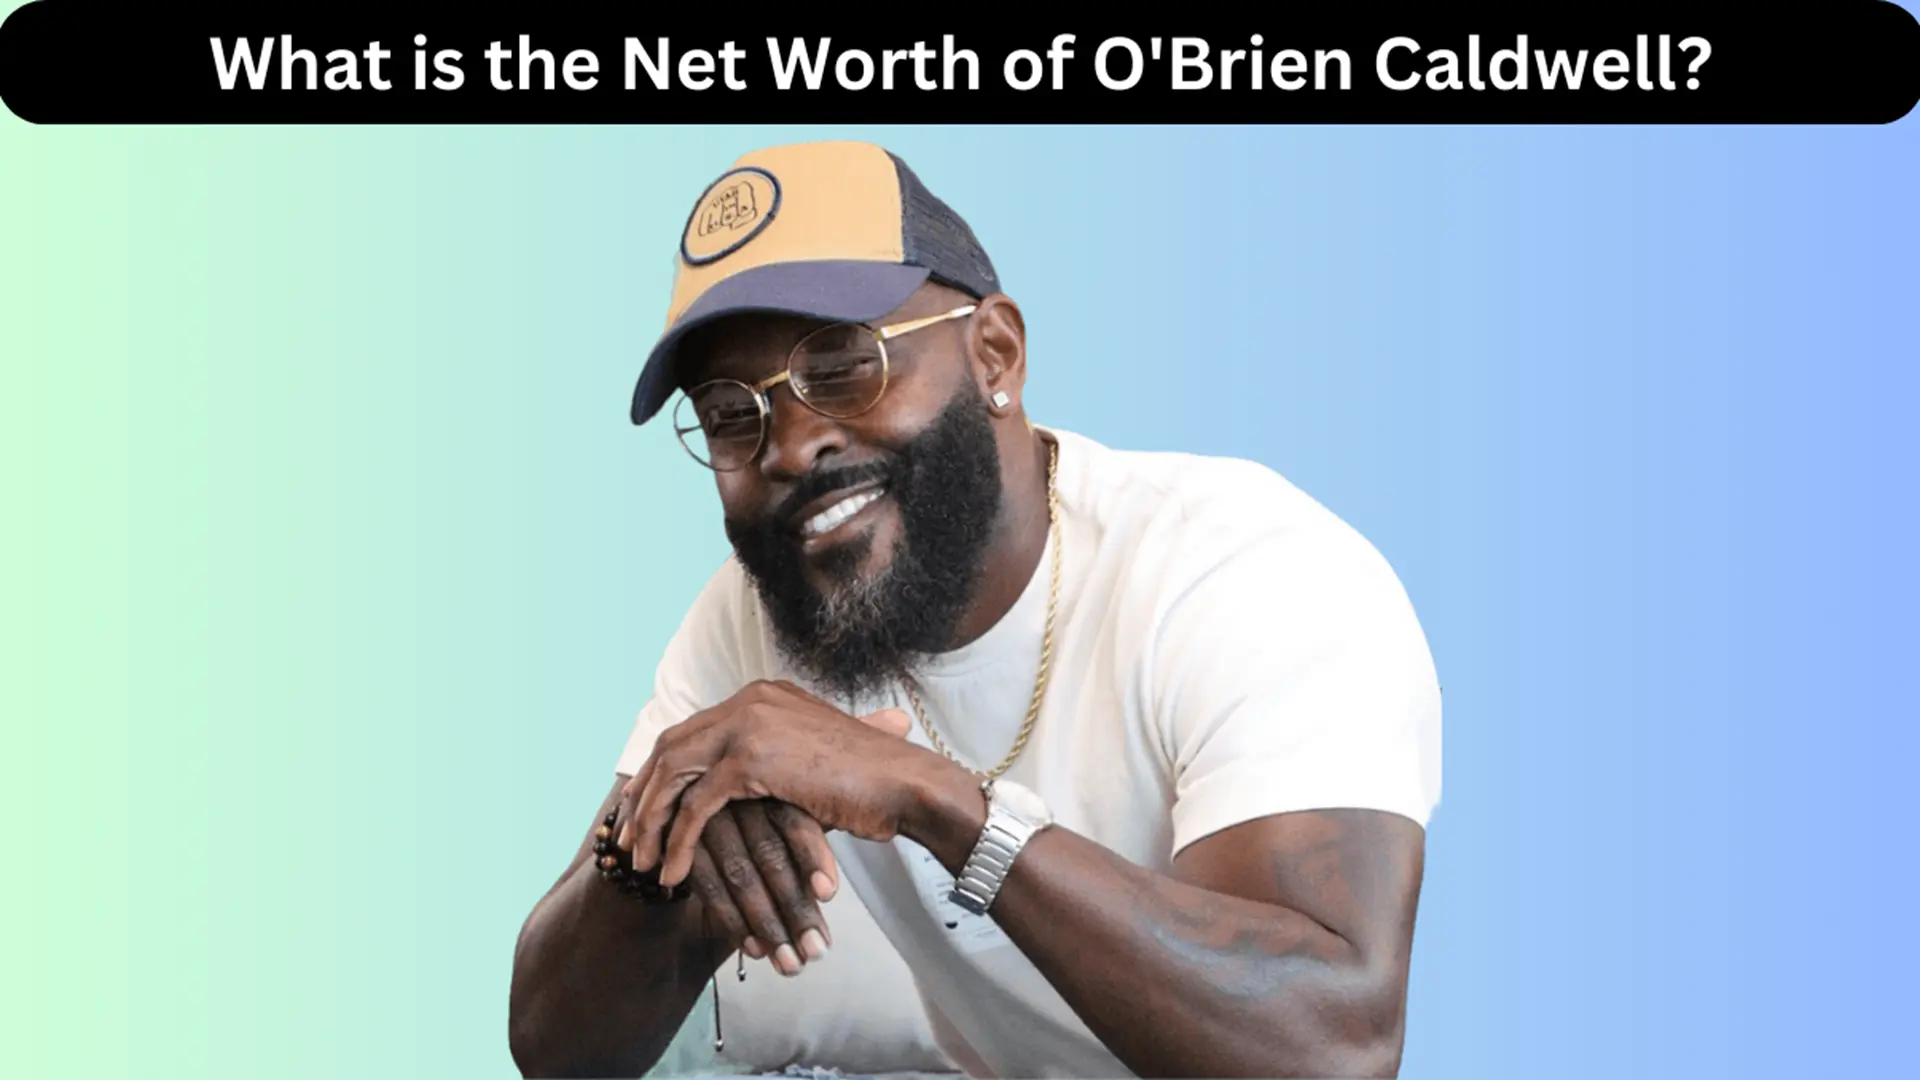 What is the Net Worth of O'Brien Caldwell